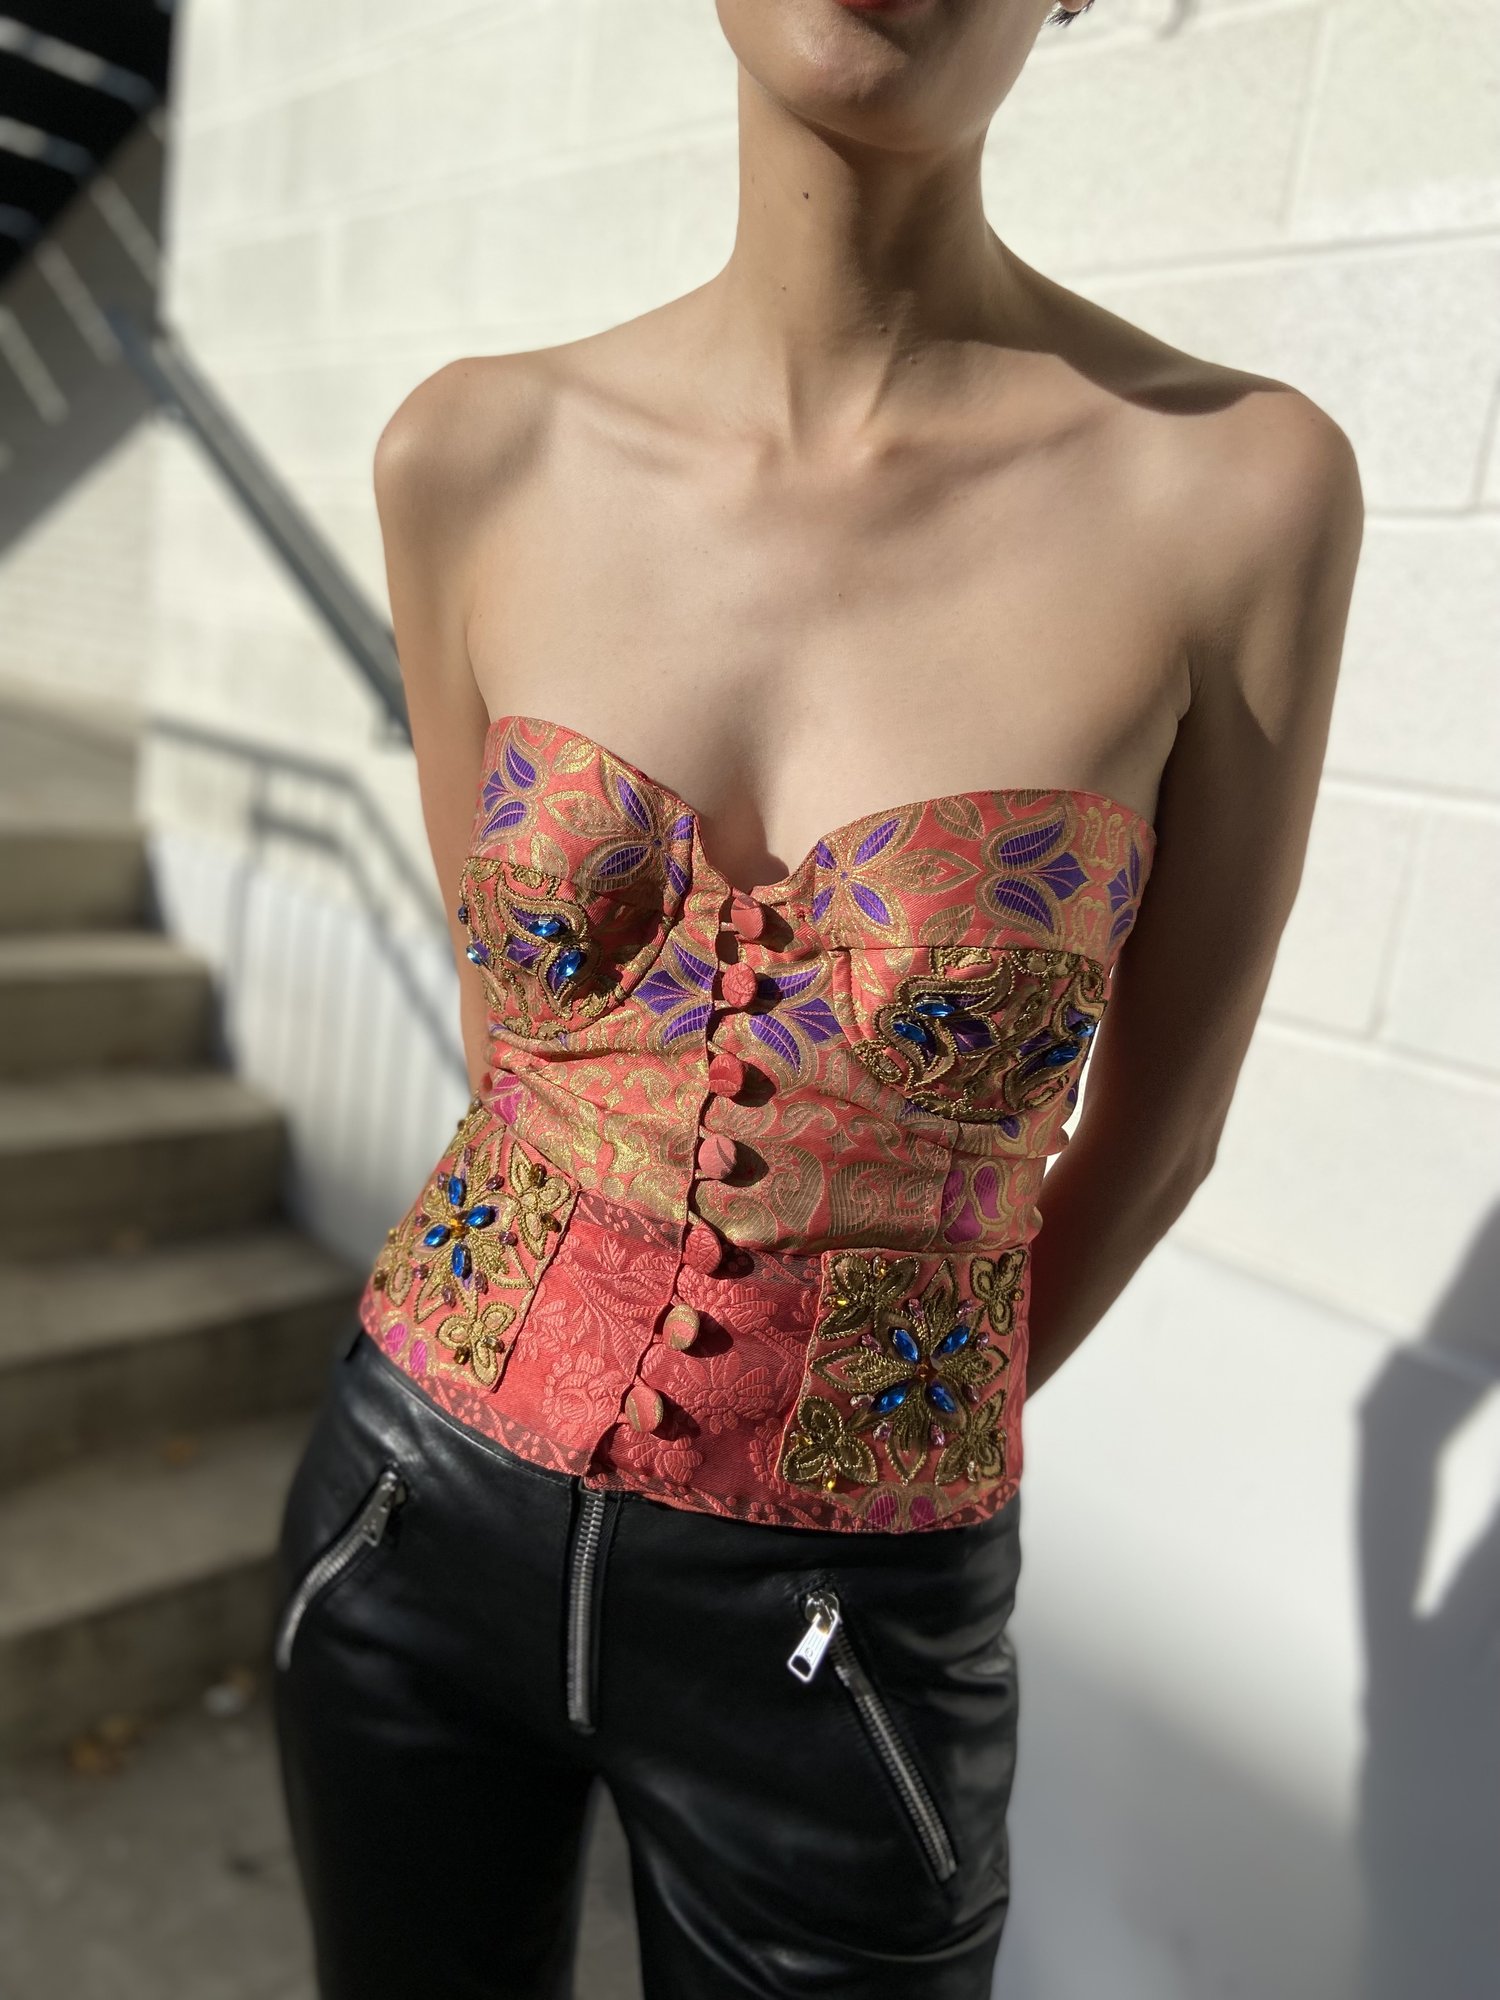 + Bustier Garment LACROIX — Jeweled 90s CHRISTIAN Gold Peach